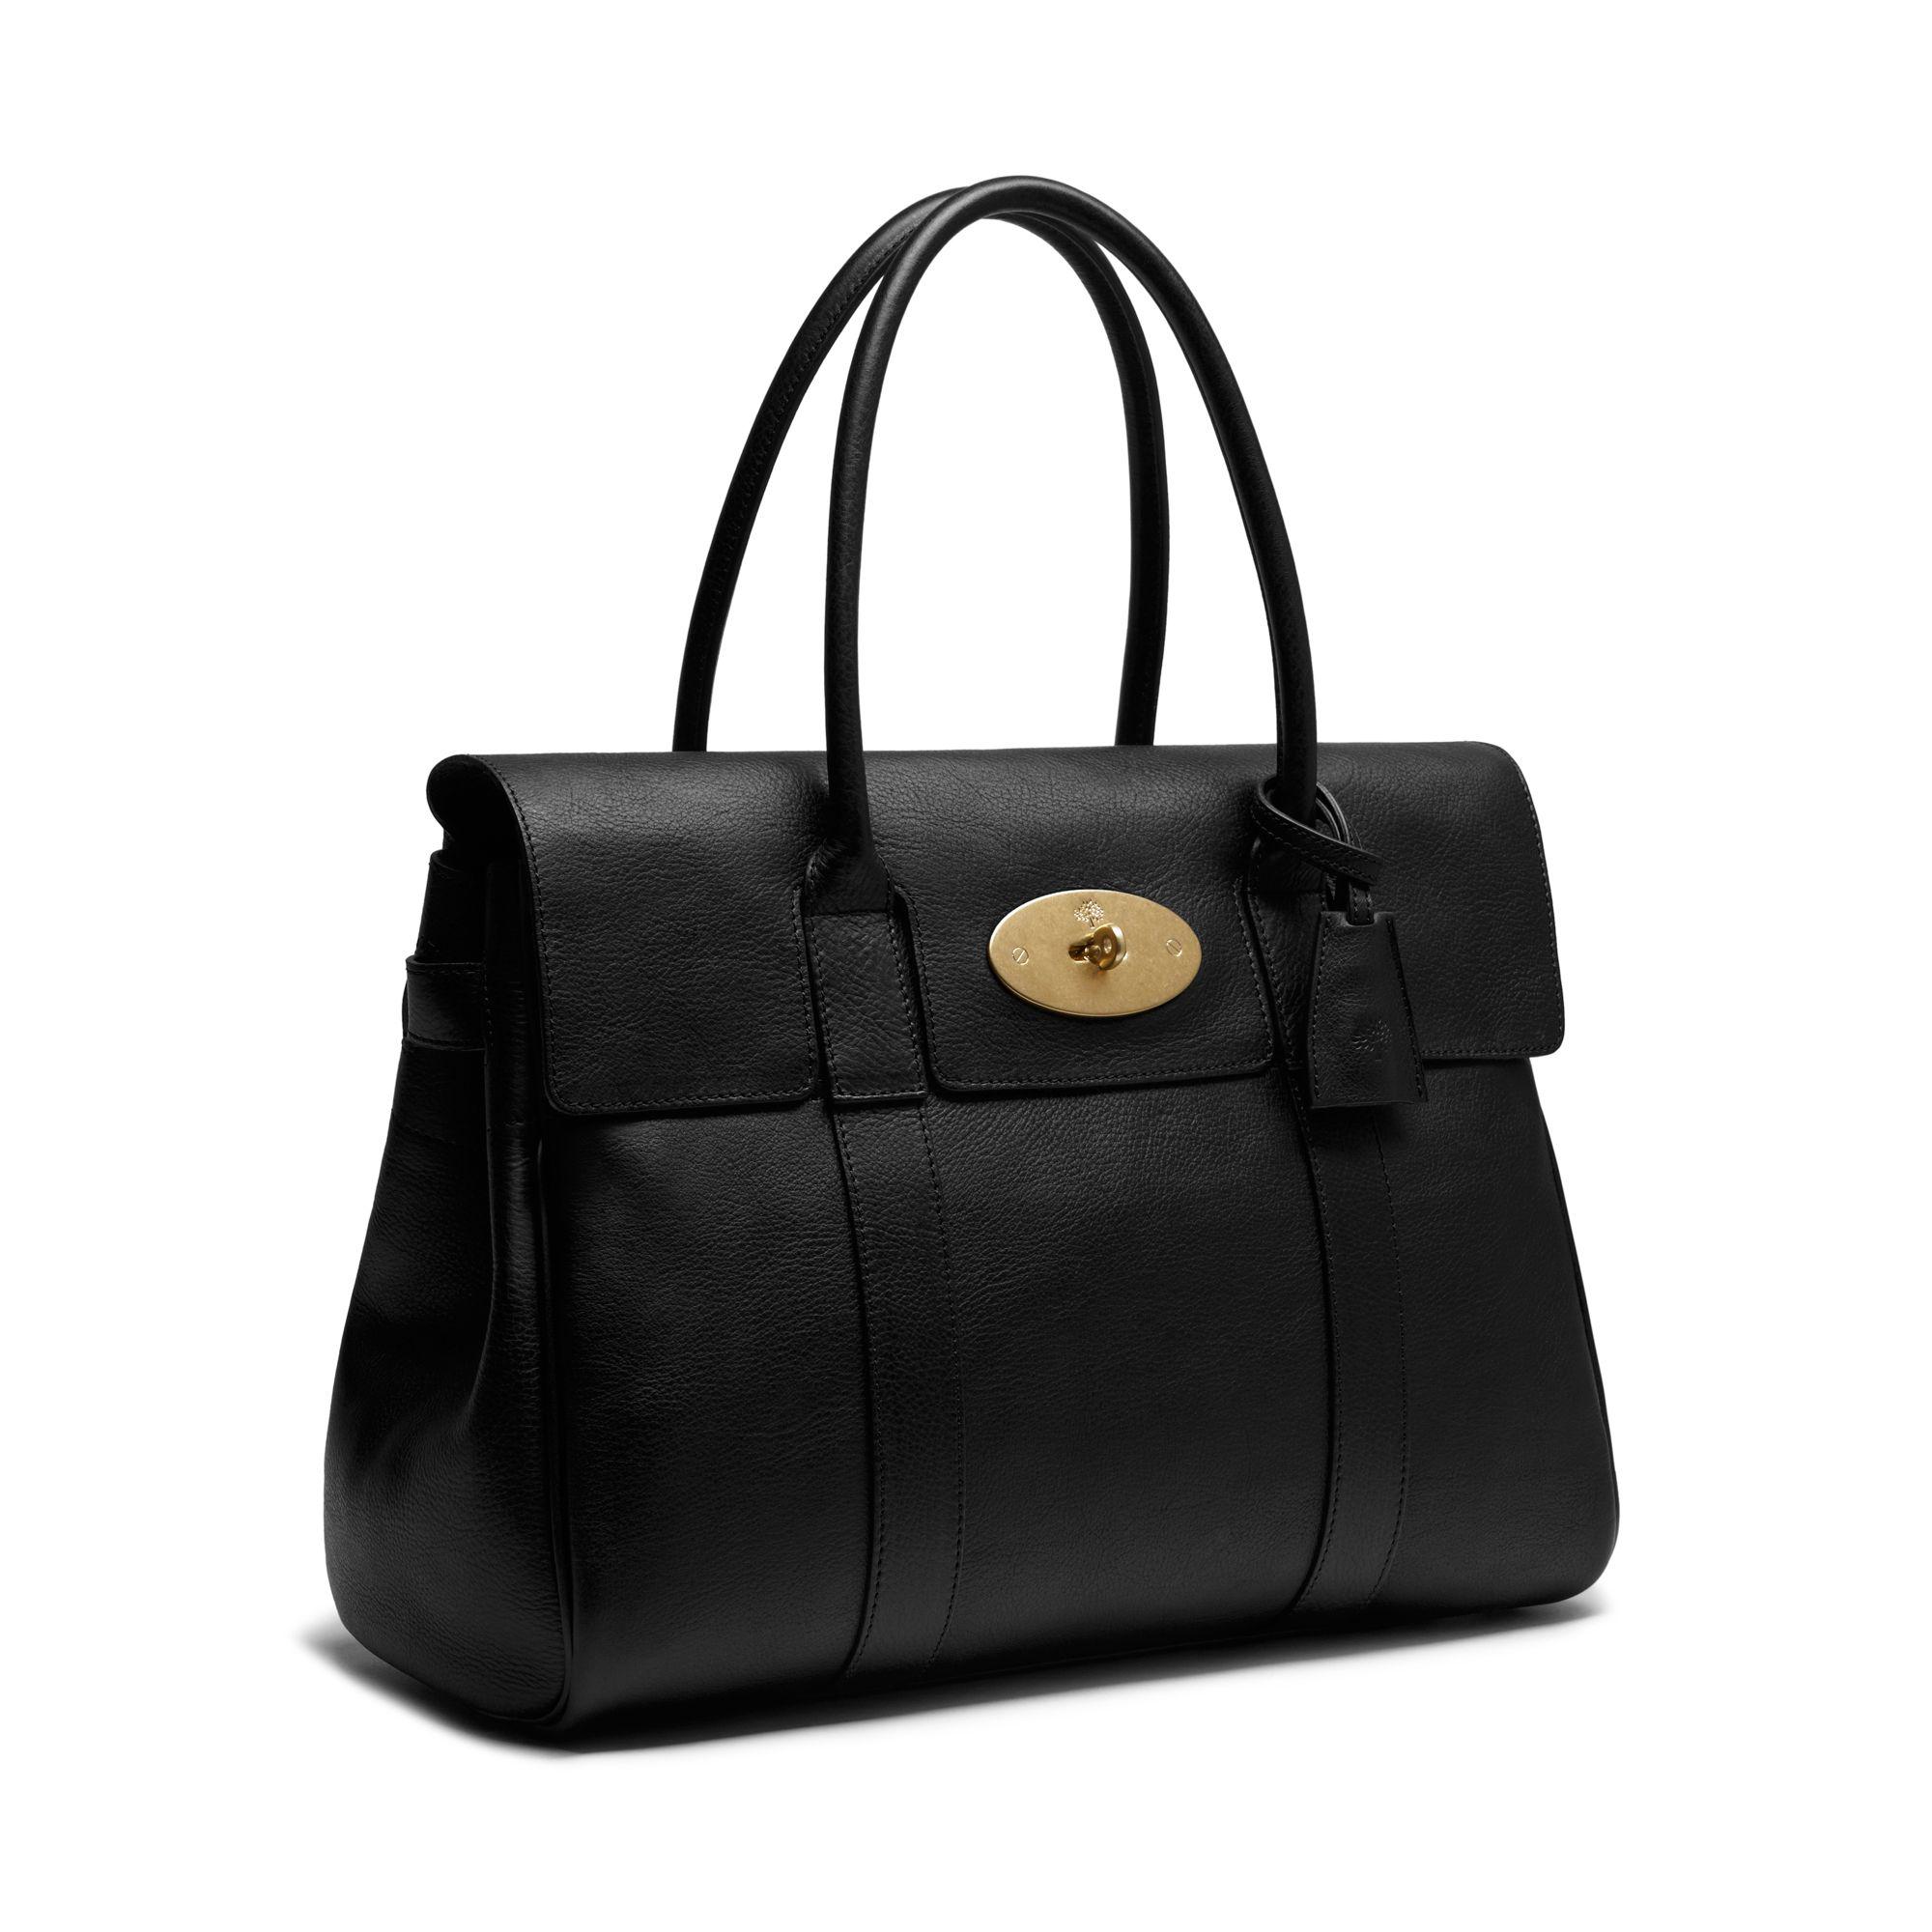 Lyst - Mulberry Bayswater Leather Bag in Black